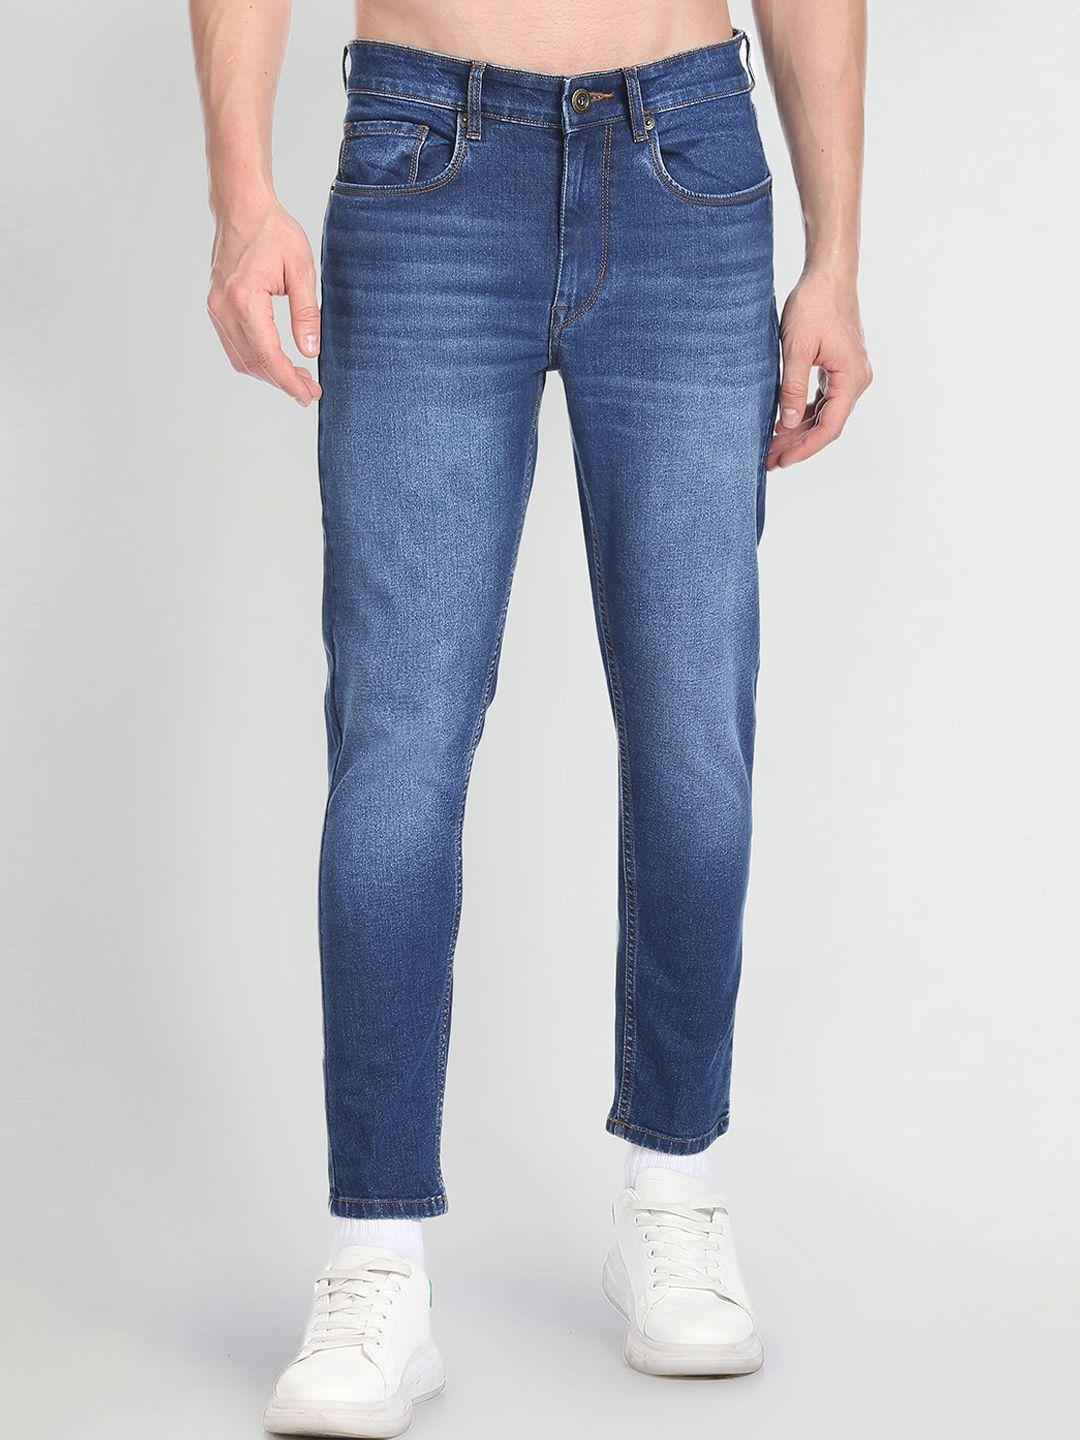 flying-machine-men-slim-fit-low-distress-heavy-fade-stretchable-jeans